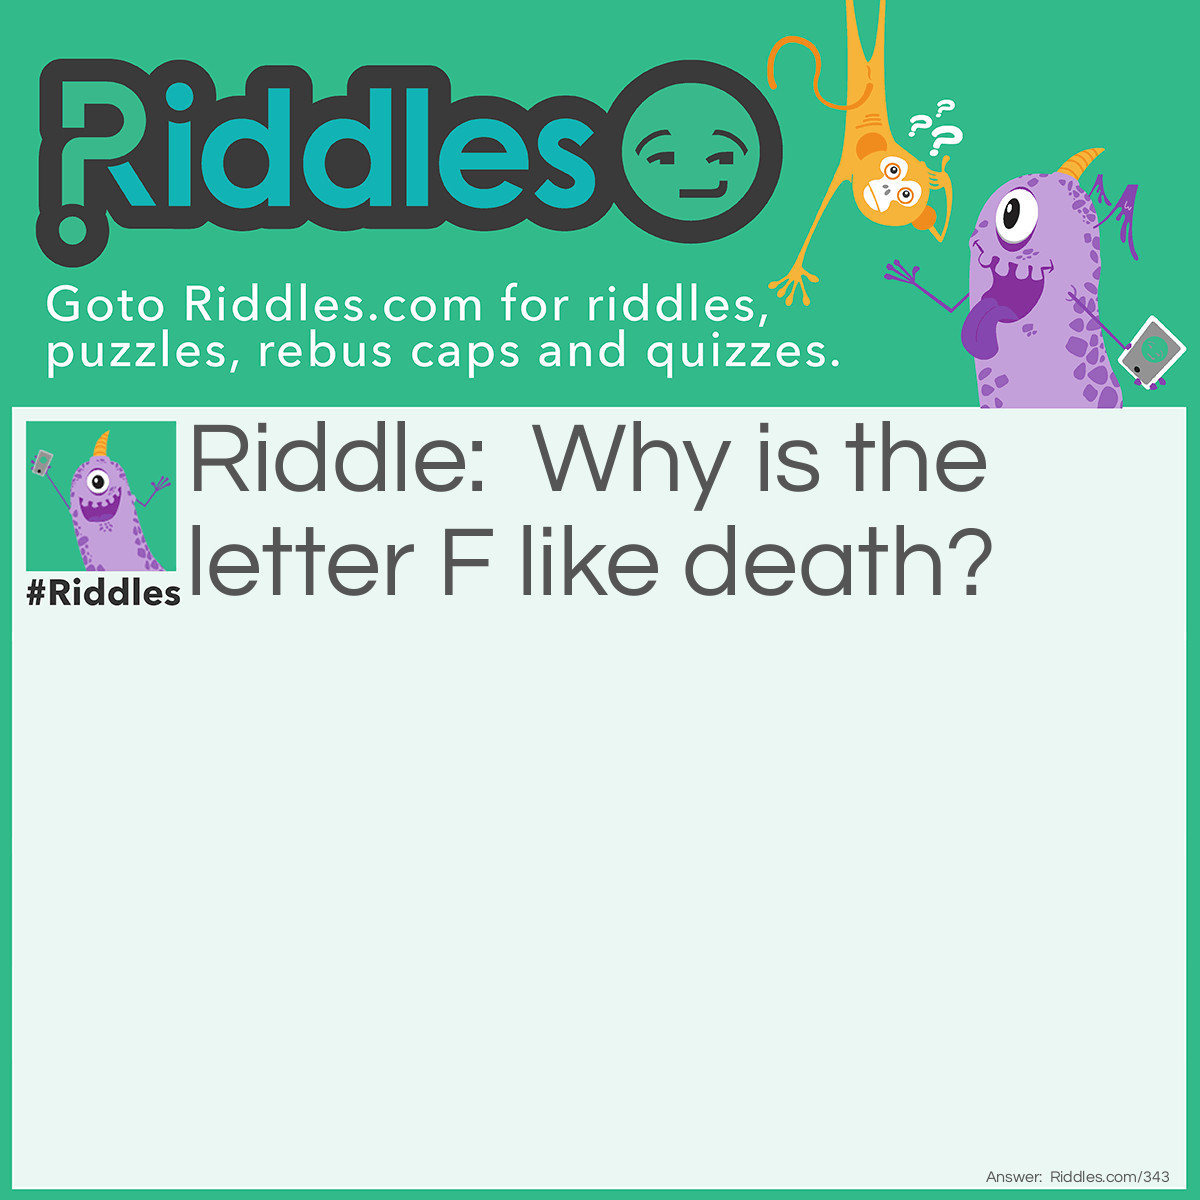 Riddle: Why is the letter F like death? Answer: Because without it life is a lie, or it makes life a lie.